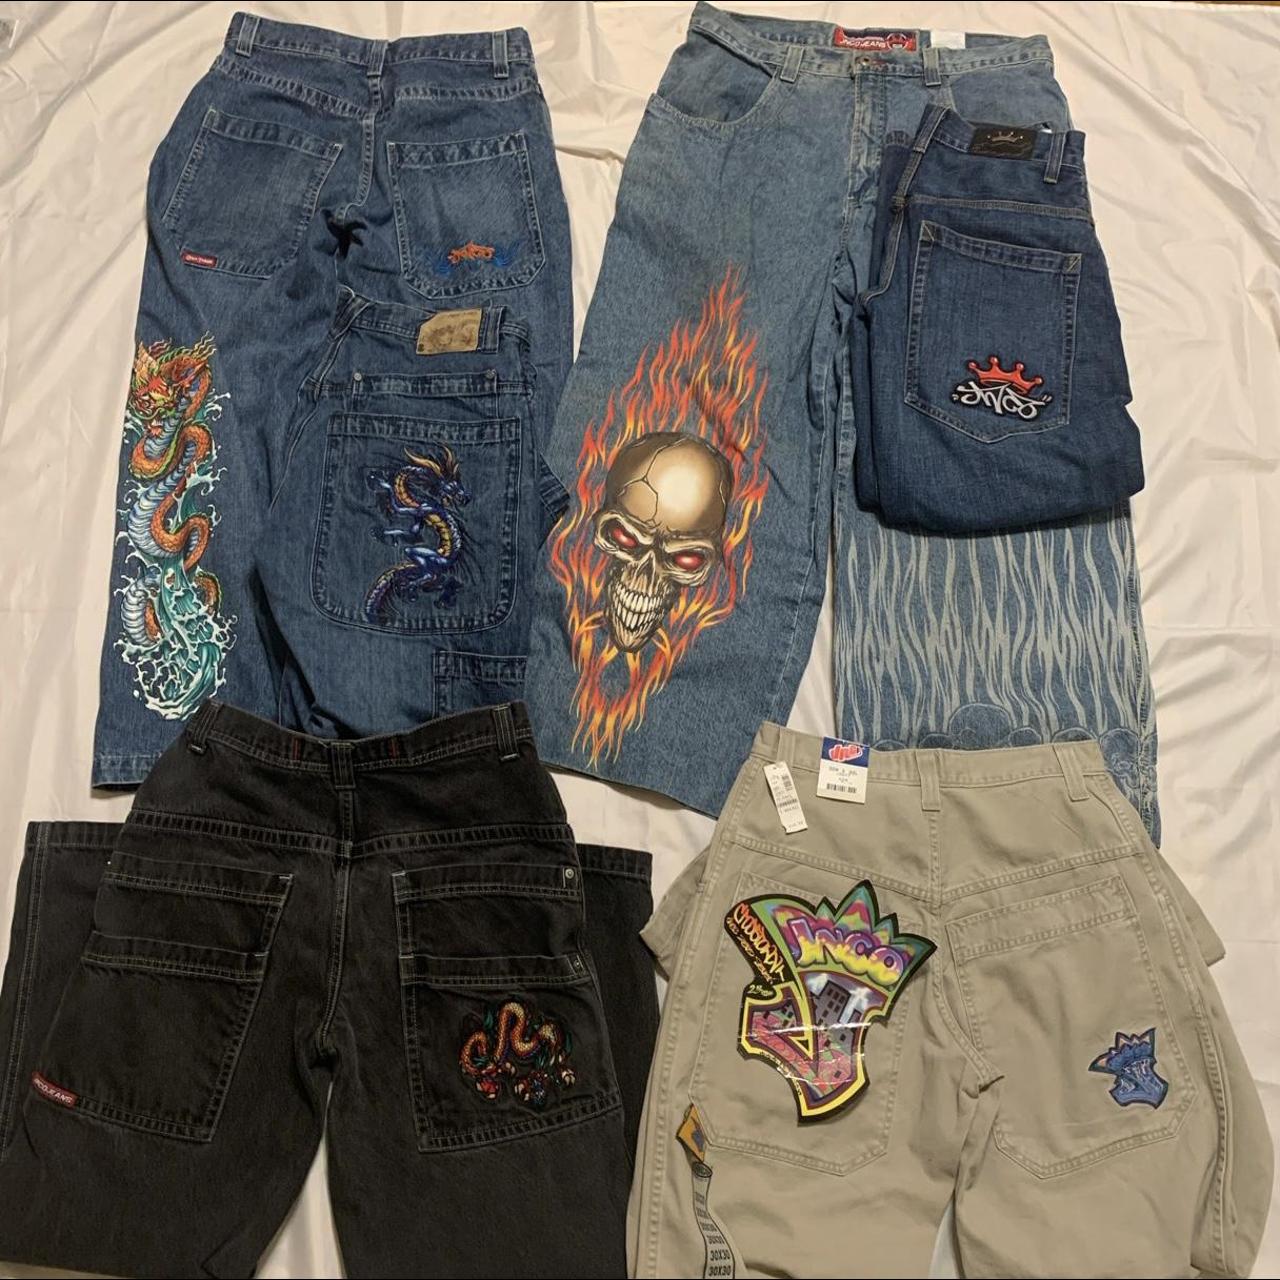 Trading for jncos #jnco #jnco jeans #baggy #wide... - Depop